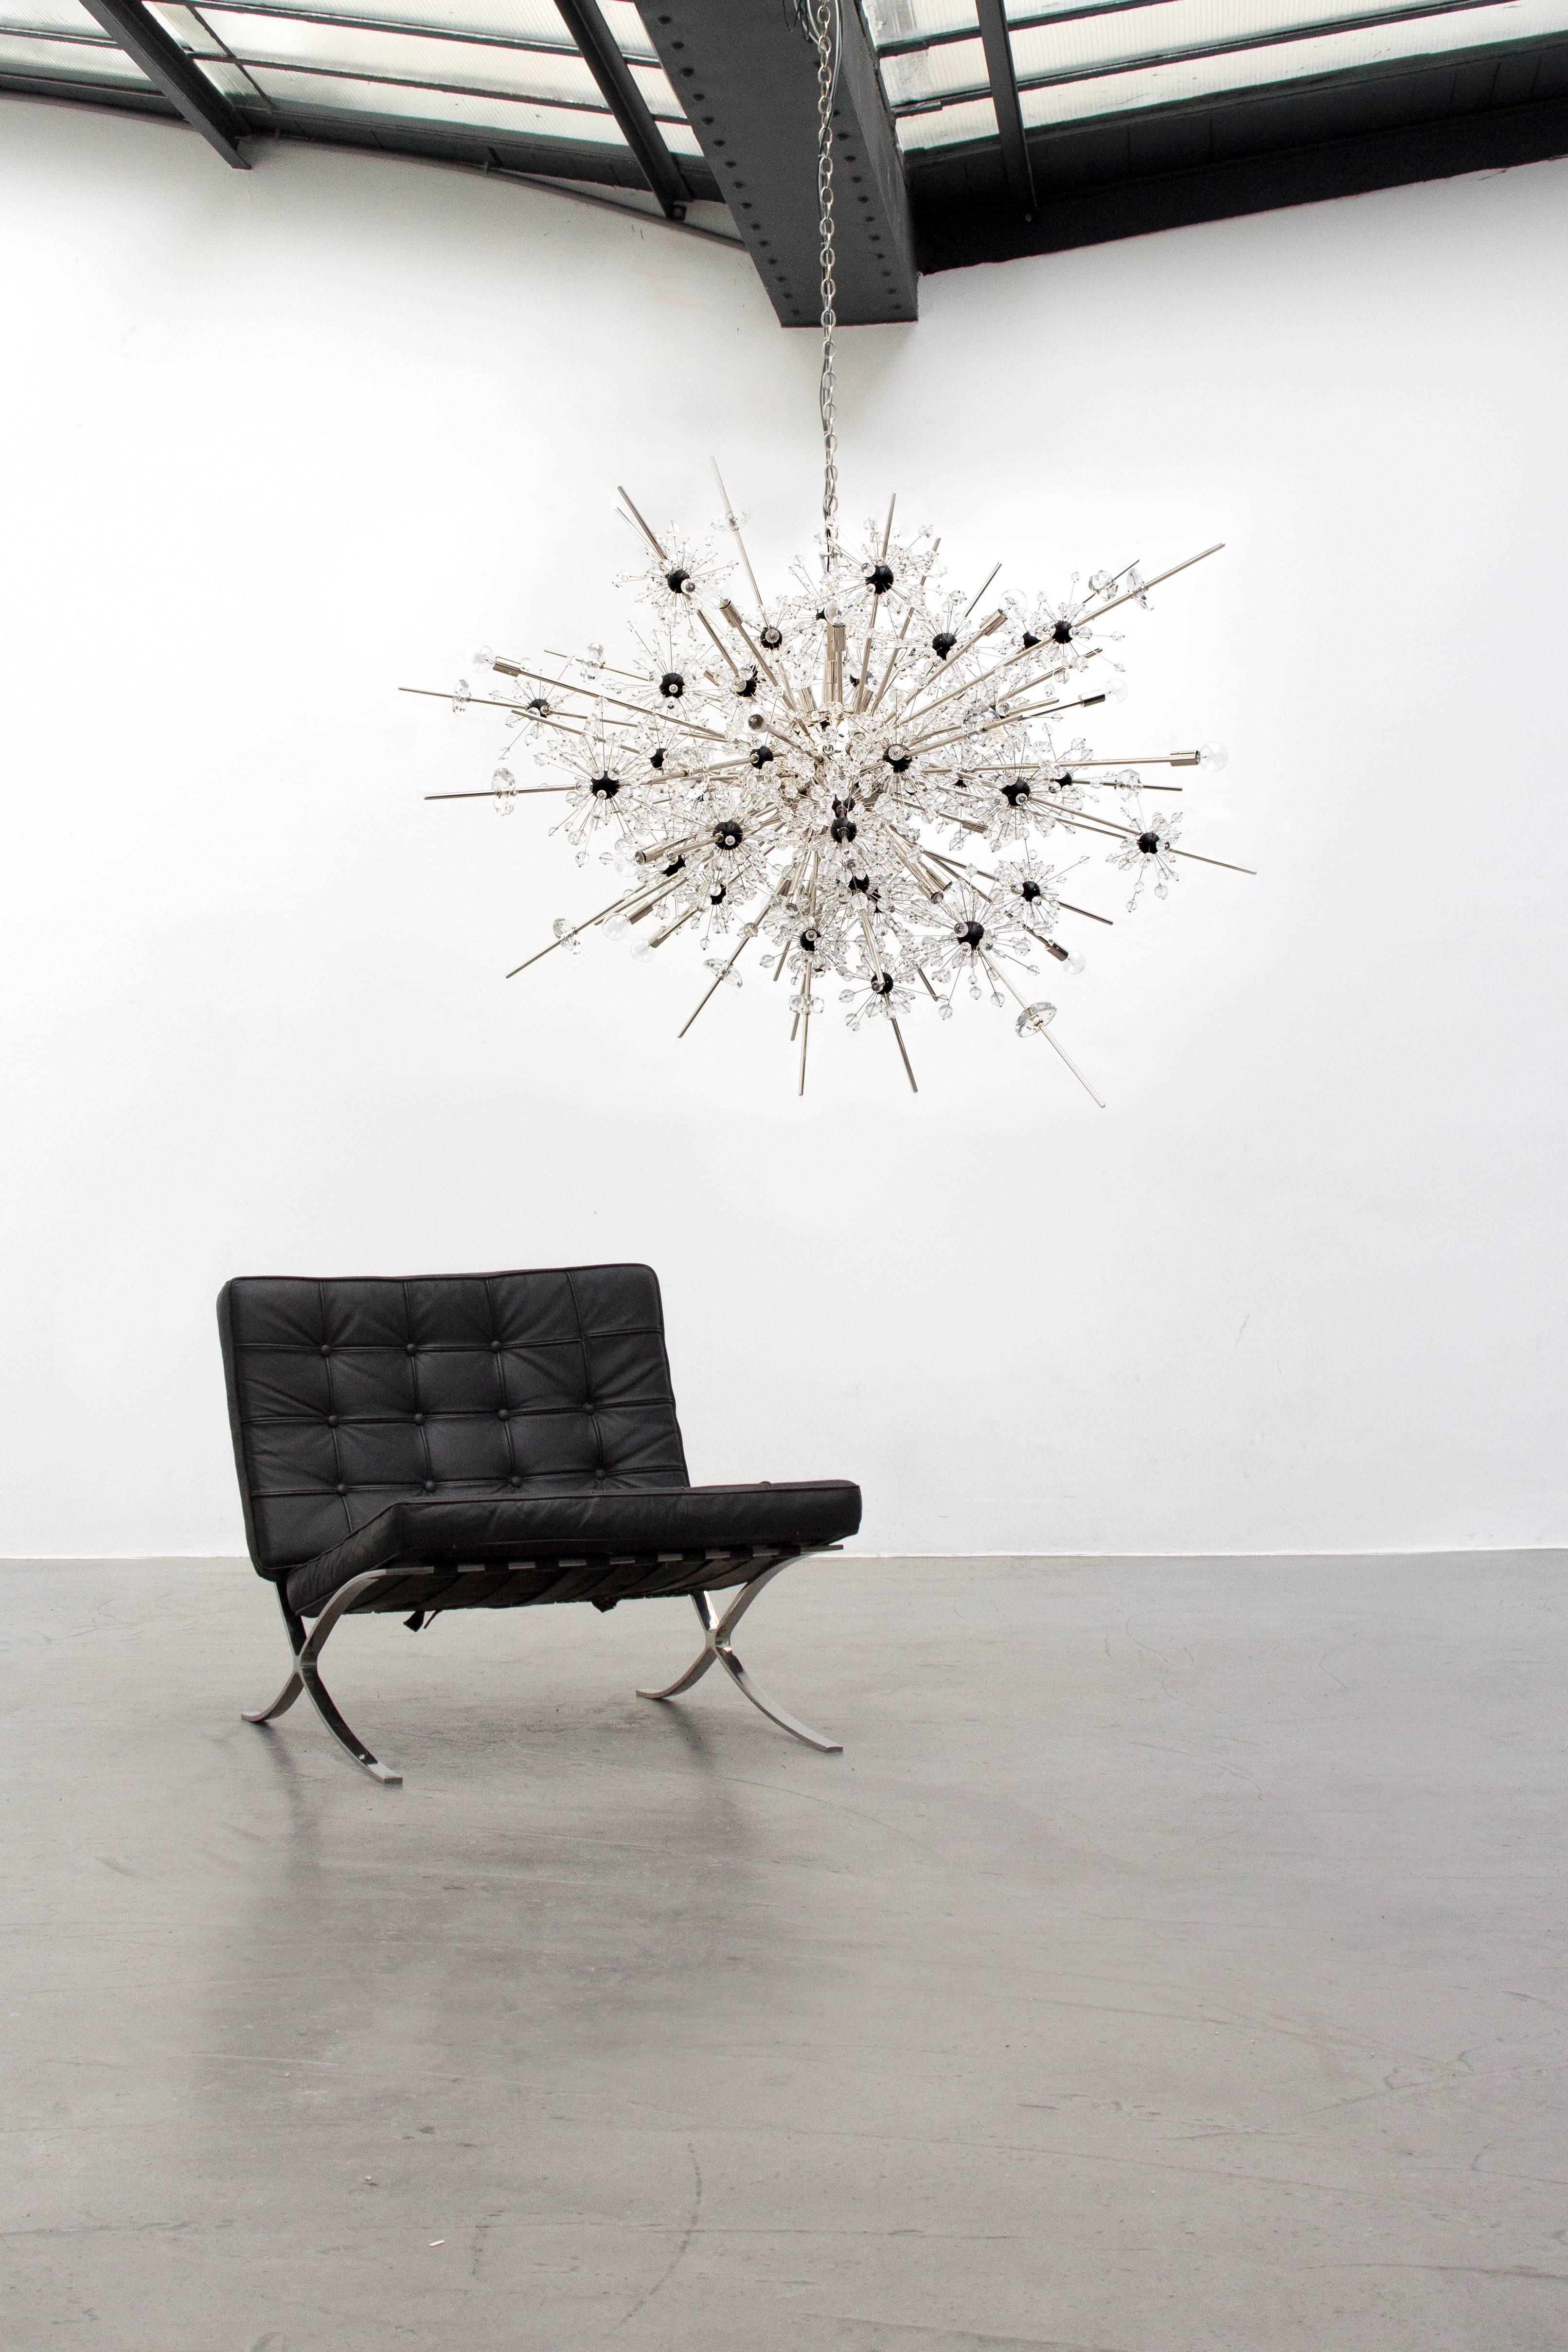 We are proud to offer this astonishing Lobmeyr Sputnik chandelier with a breathtaking diameter of 67“. This impressive piece was originally designed in 1966 by Hans Harald Rath as a variation of the famous Metropolitan Opera chandelier for the